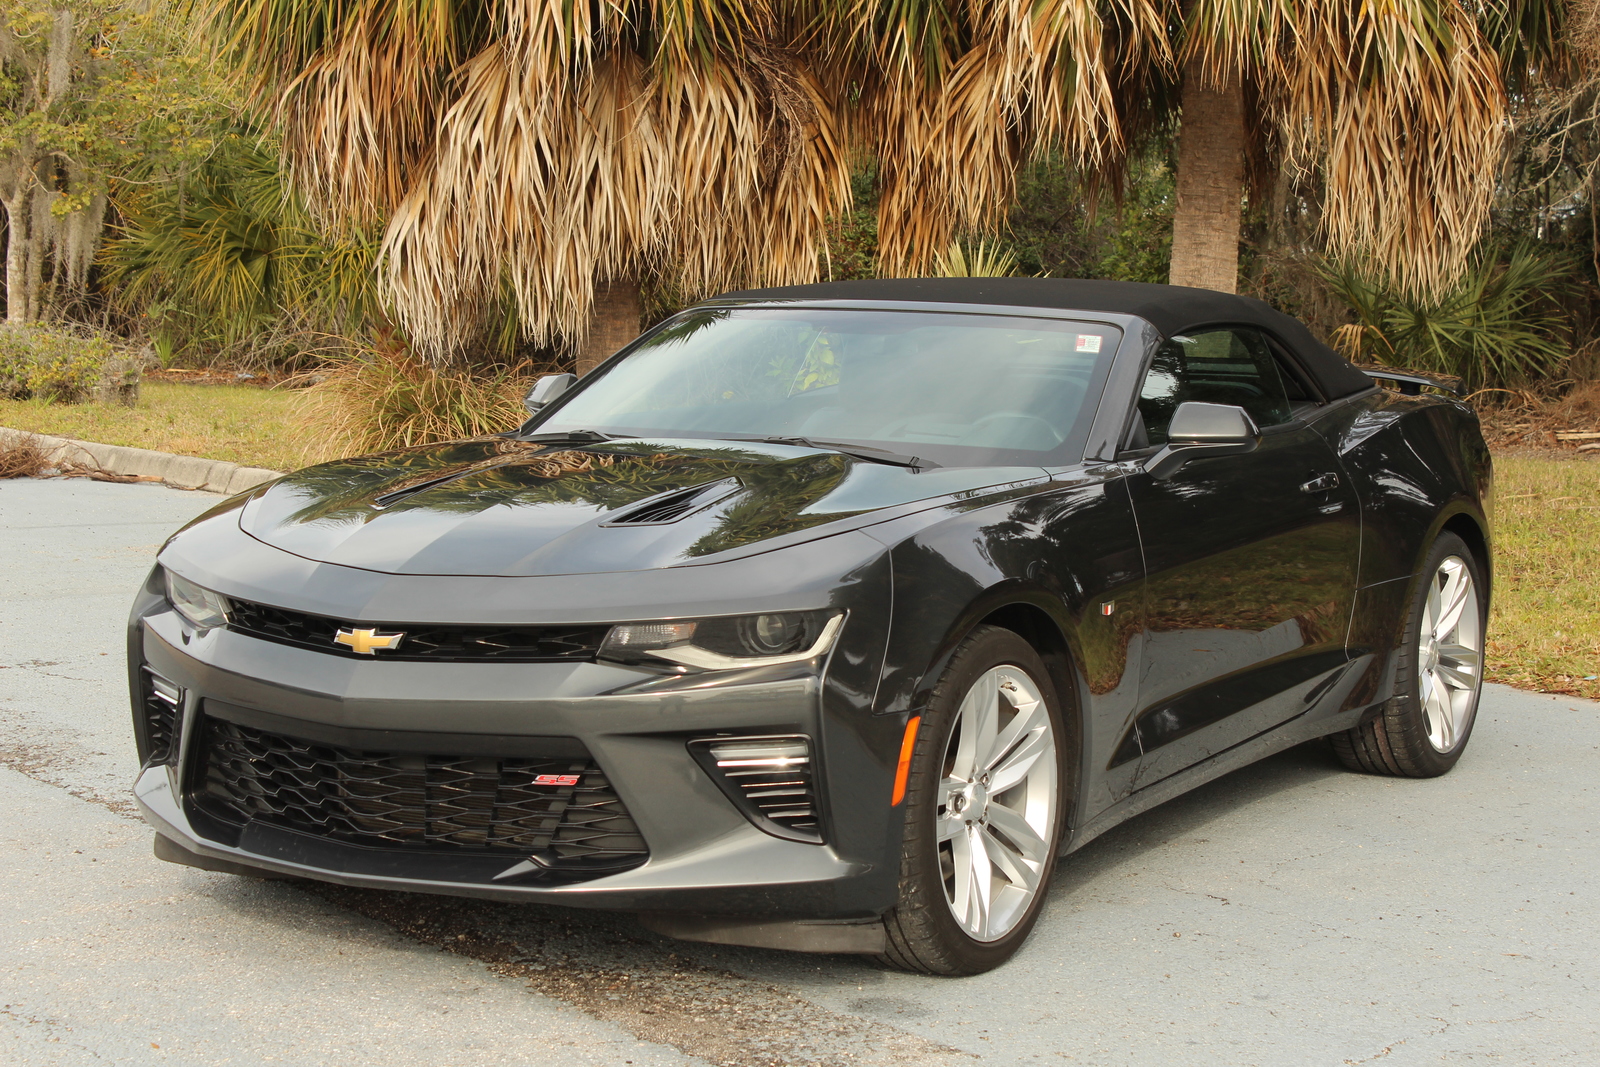 PreOwned 2017 Chevrolet Camaro 2SS Convertible in